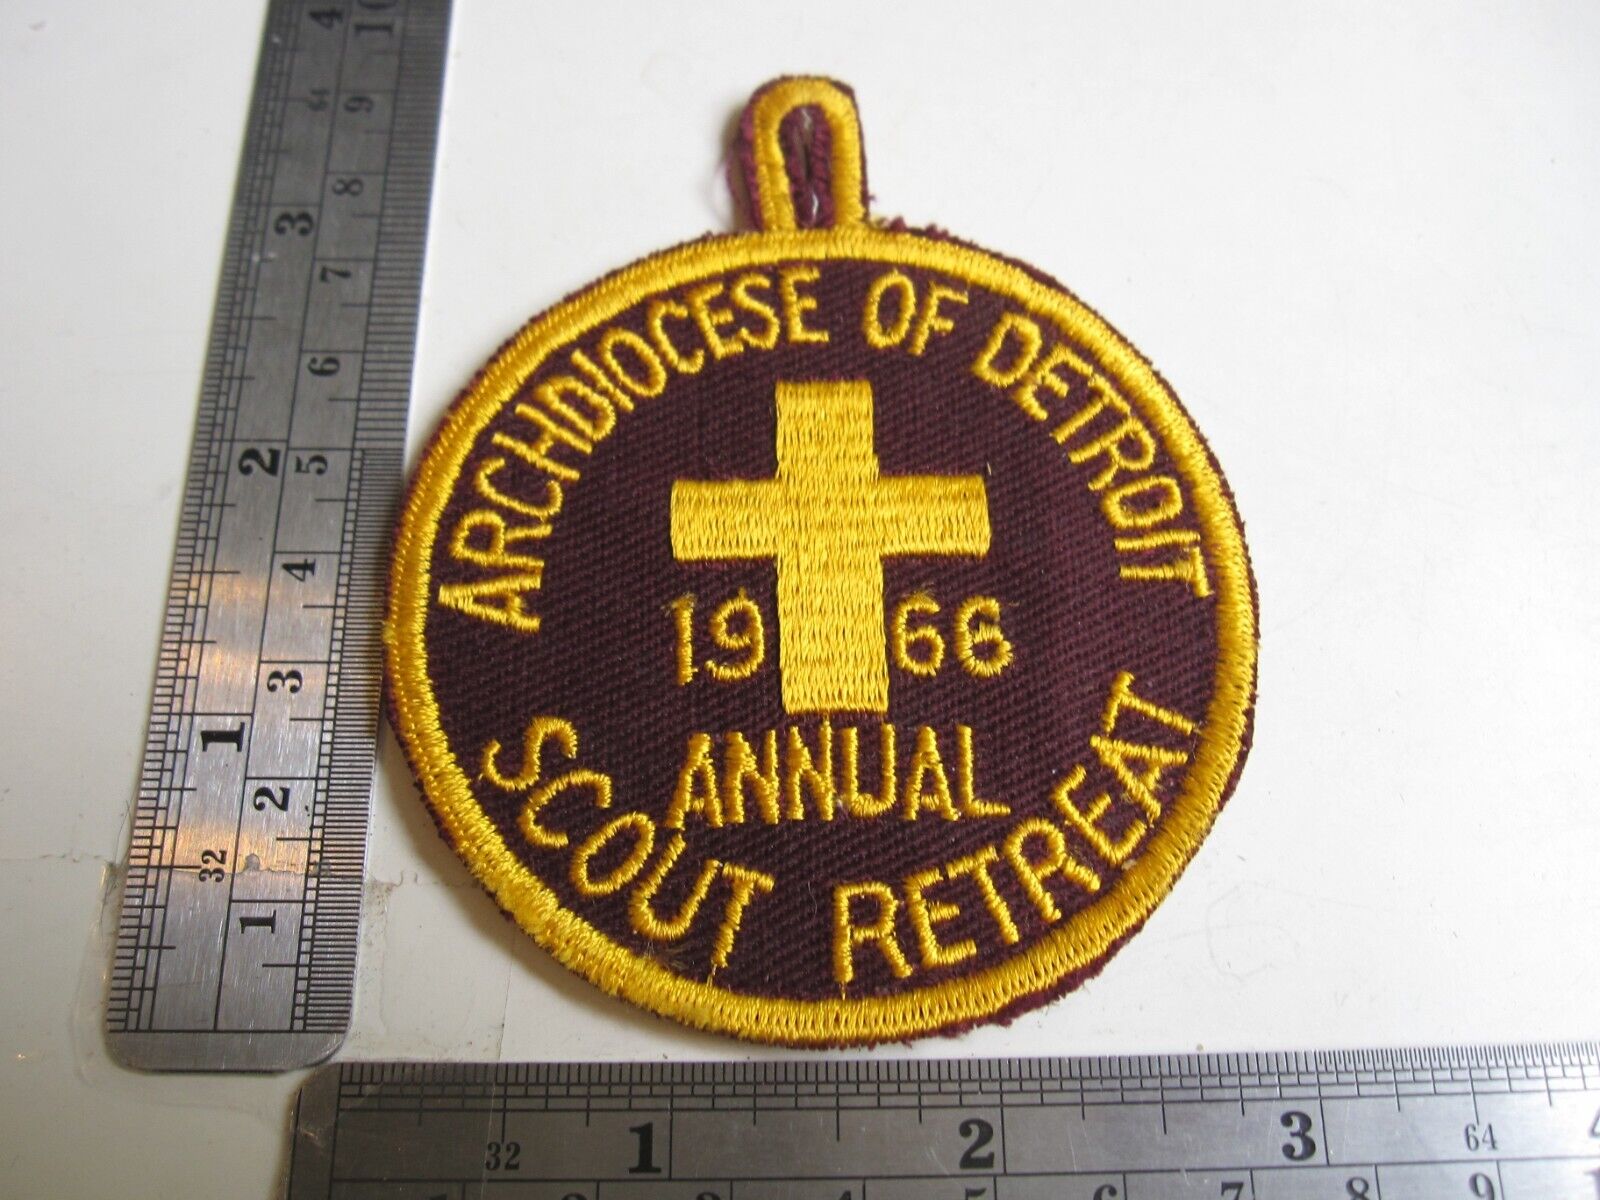 1966 BSA Scouting Archdiocese of Detroit Annual Scout Retreat Cloth Patch BIS